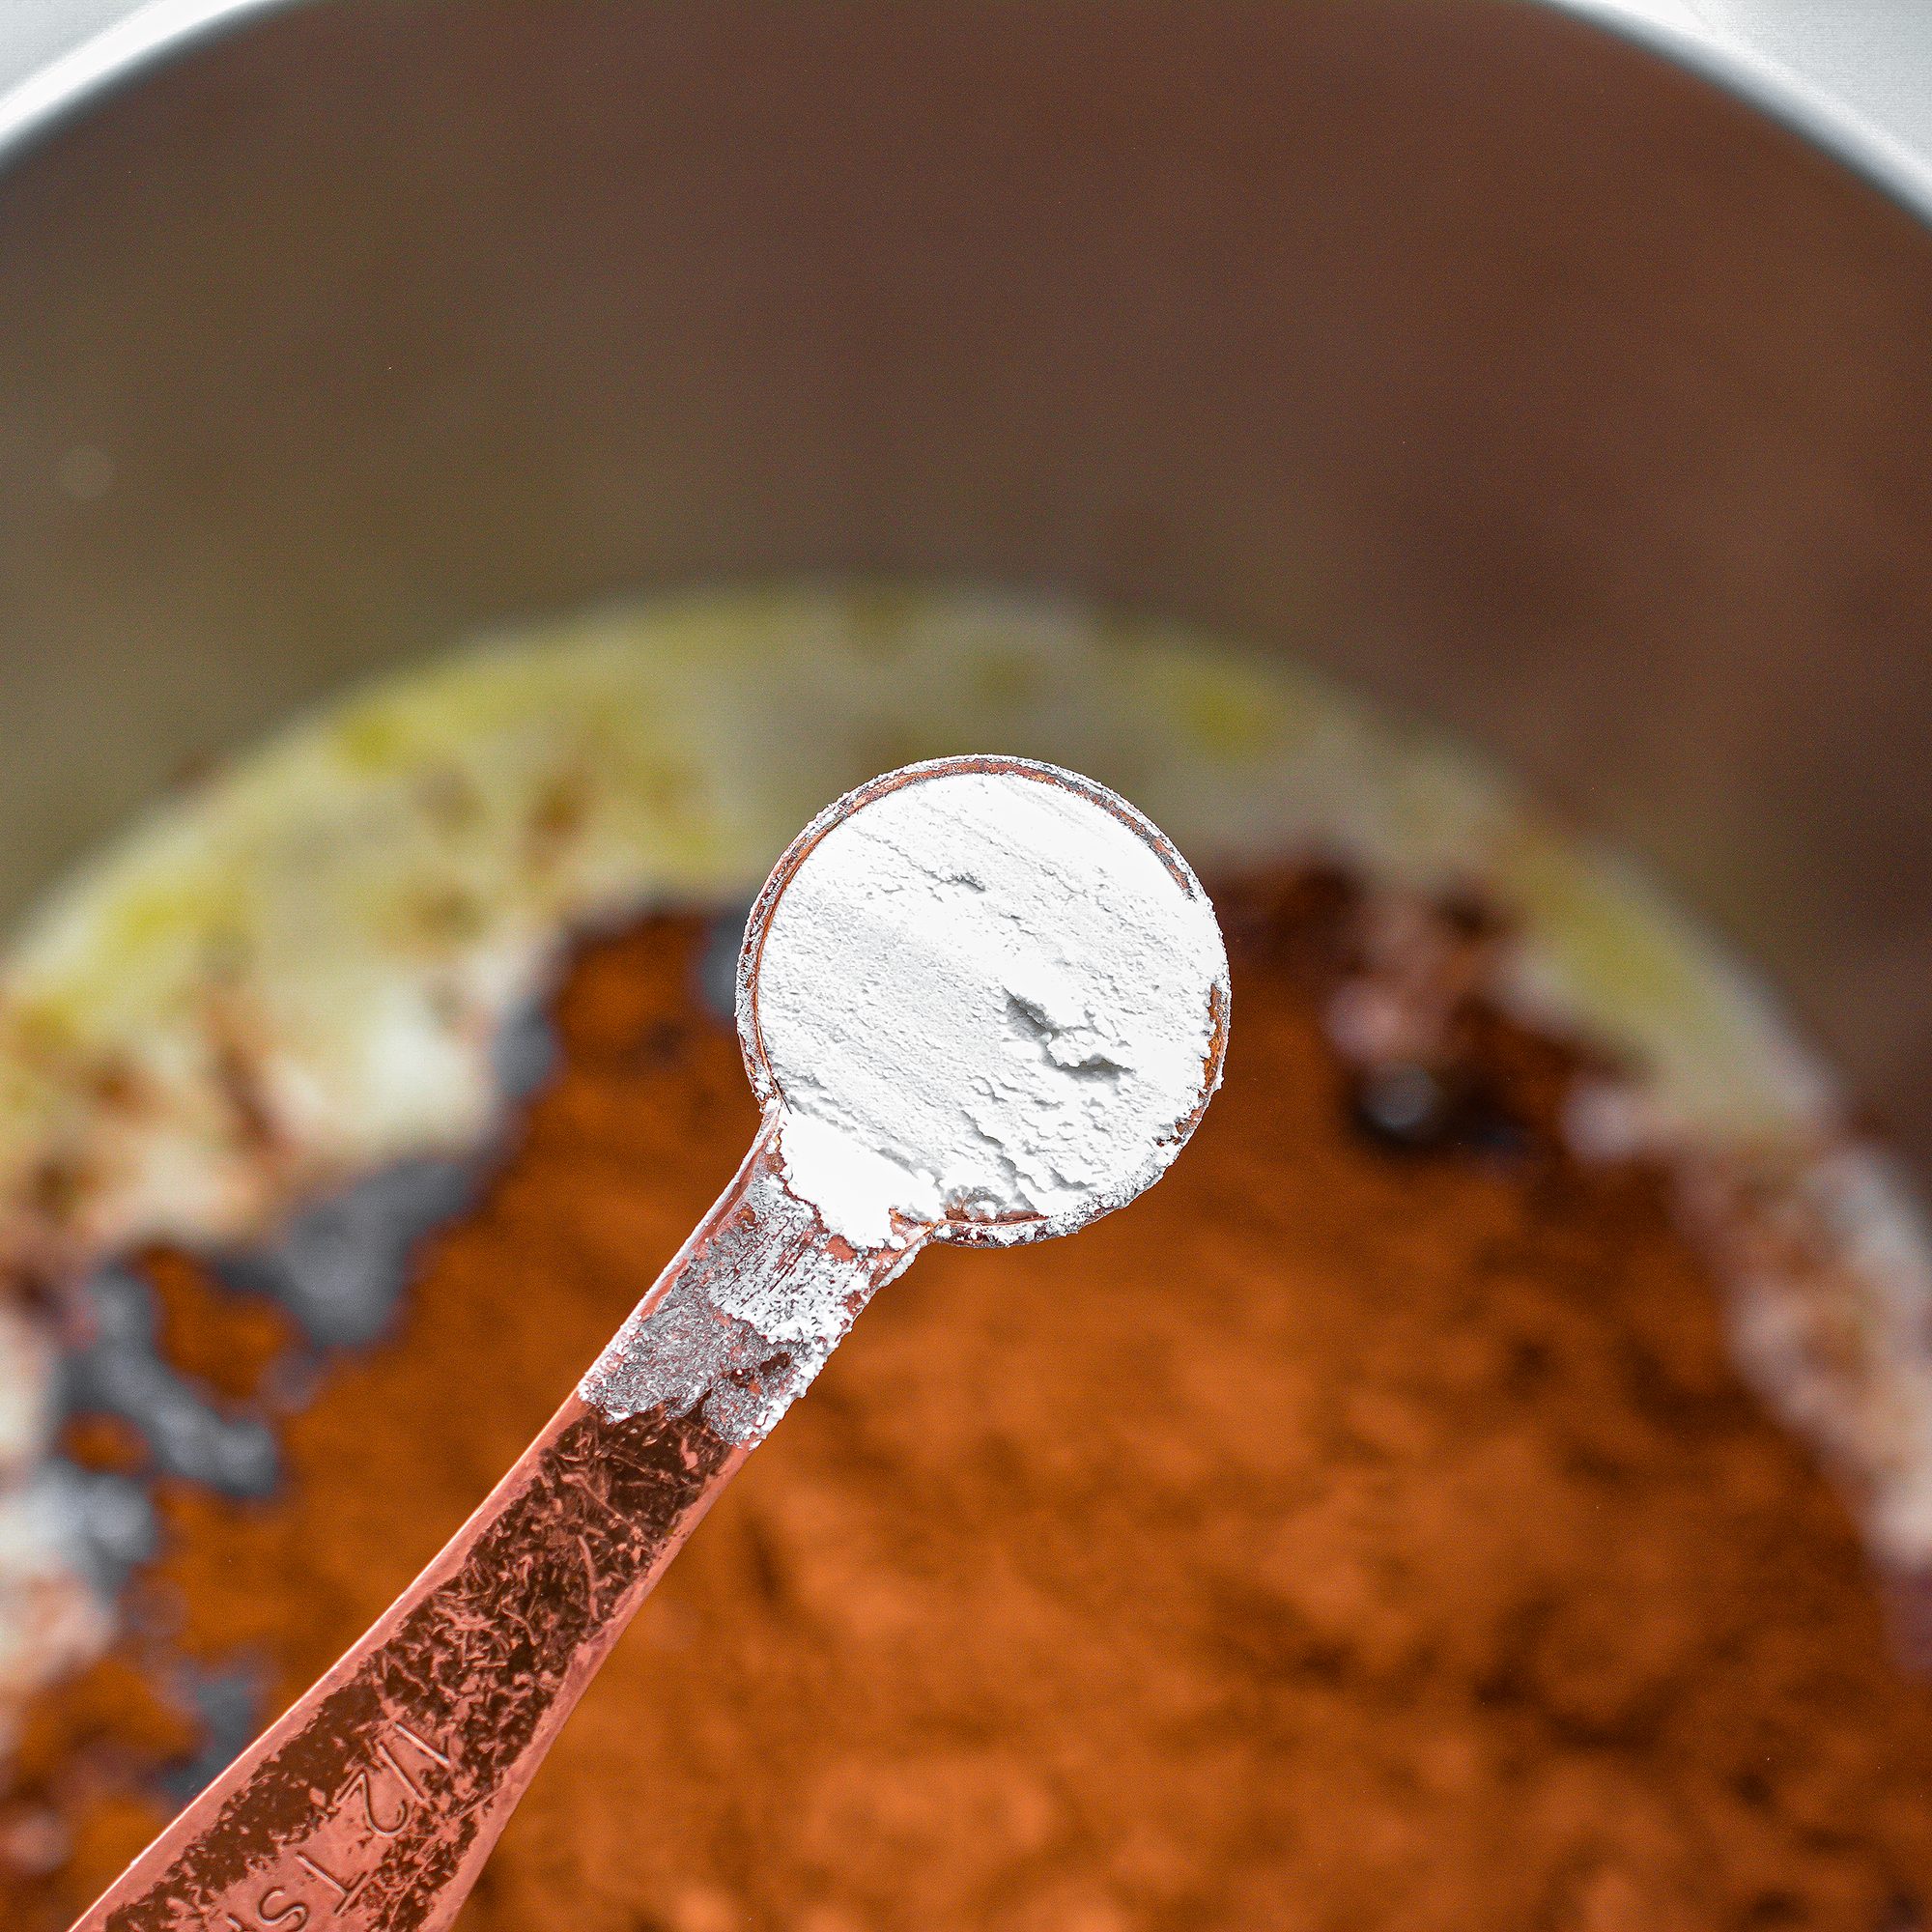 In a mixing bowl, combine all of the ingredients for the brownies and beat until smooth and creamy.